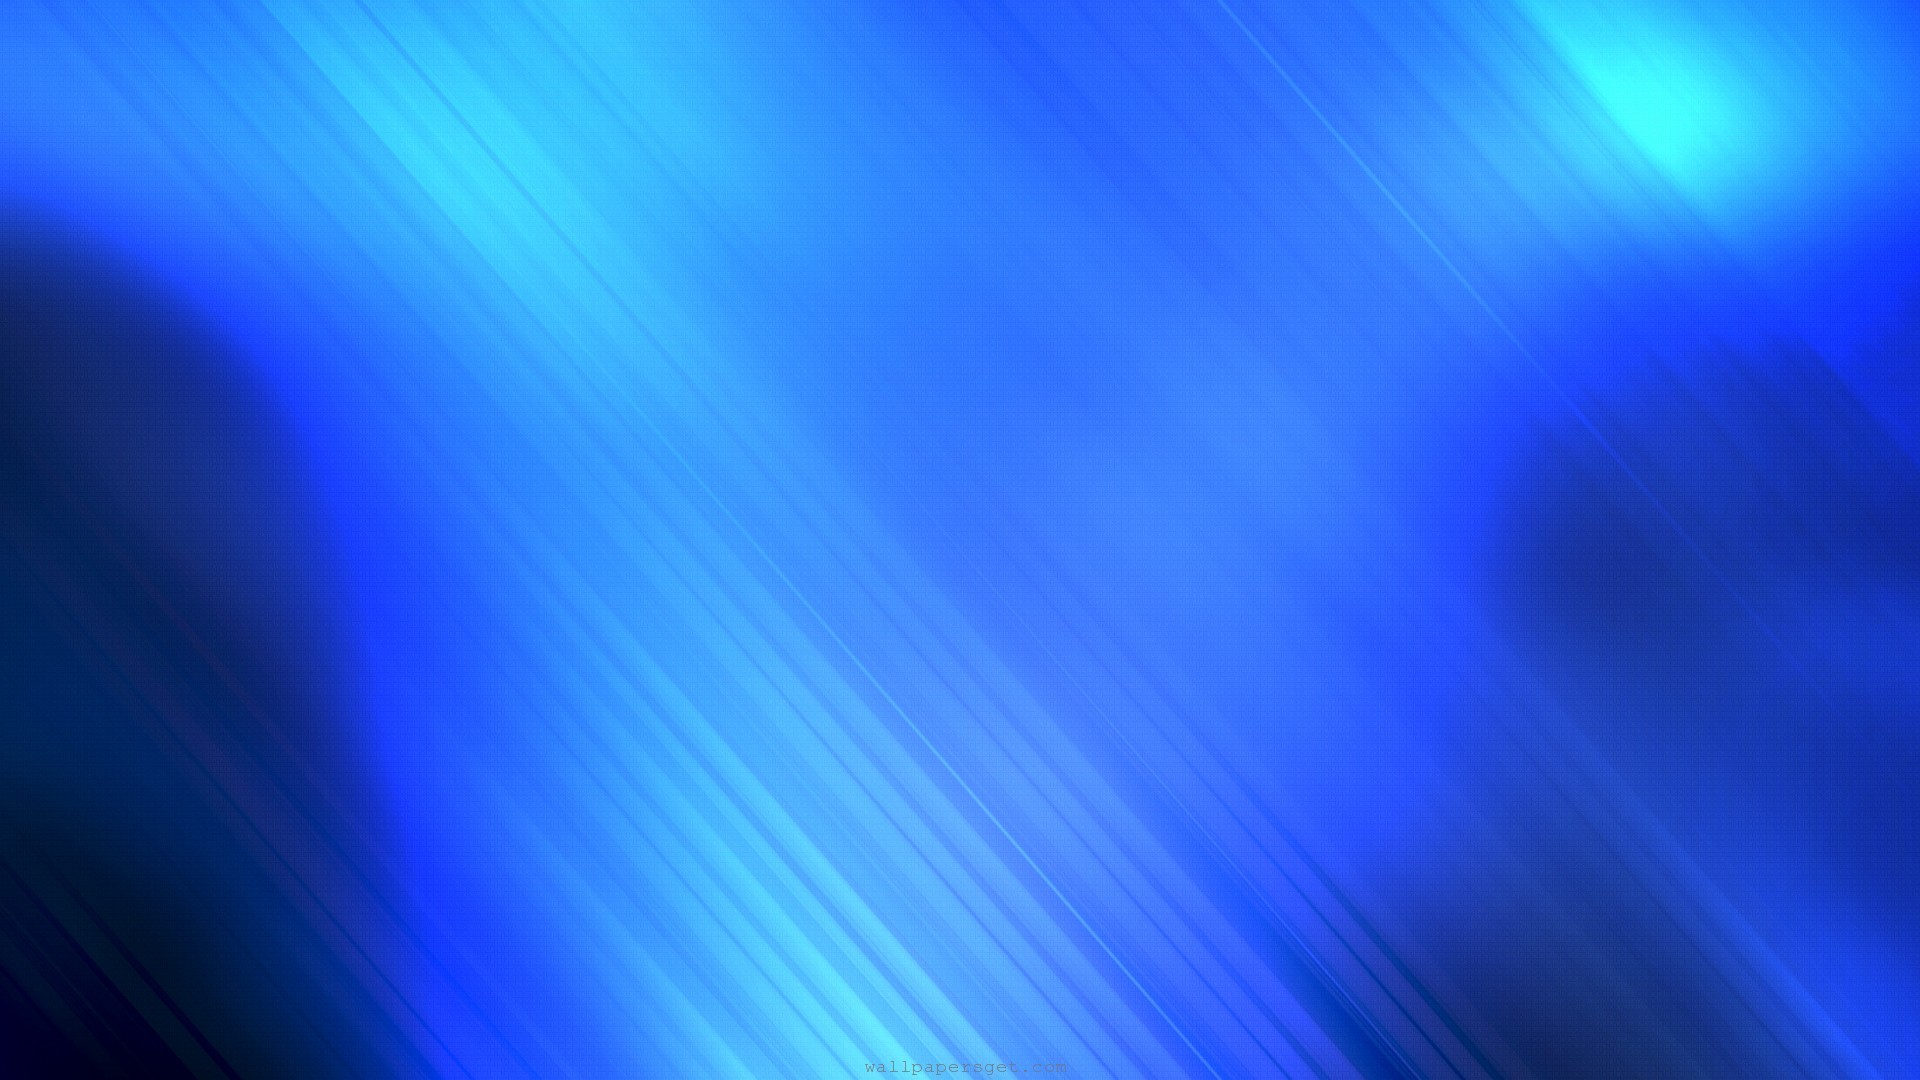 1920x1080 Blue Abstract Background 2042 Hd Wallpapers in Abstract - Imagesci.com |  Screen Savers | Pinterest | Blue wallpapers and Wallpaper